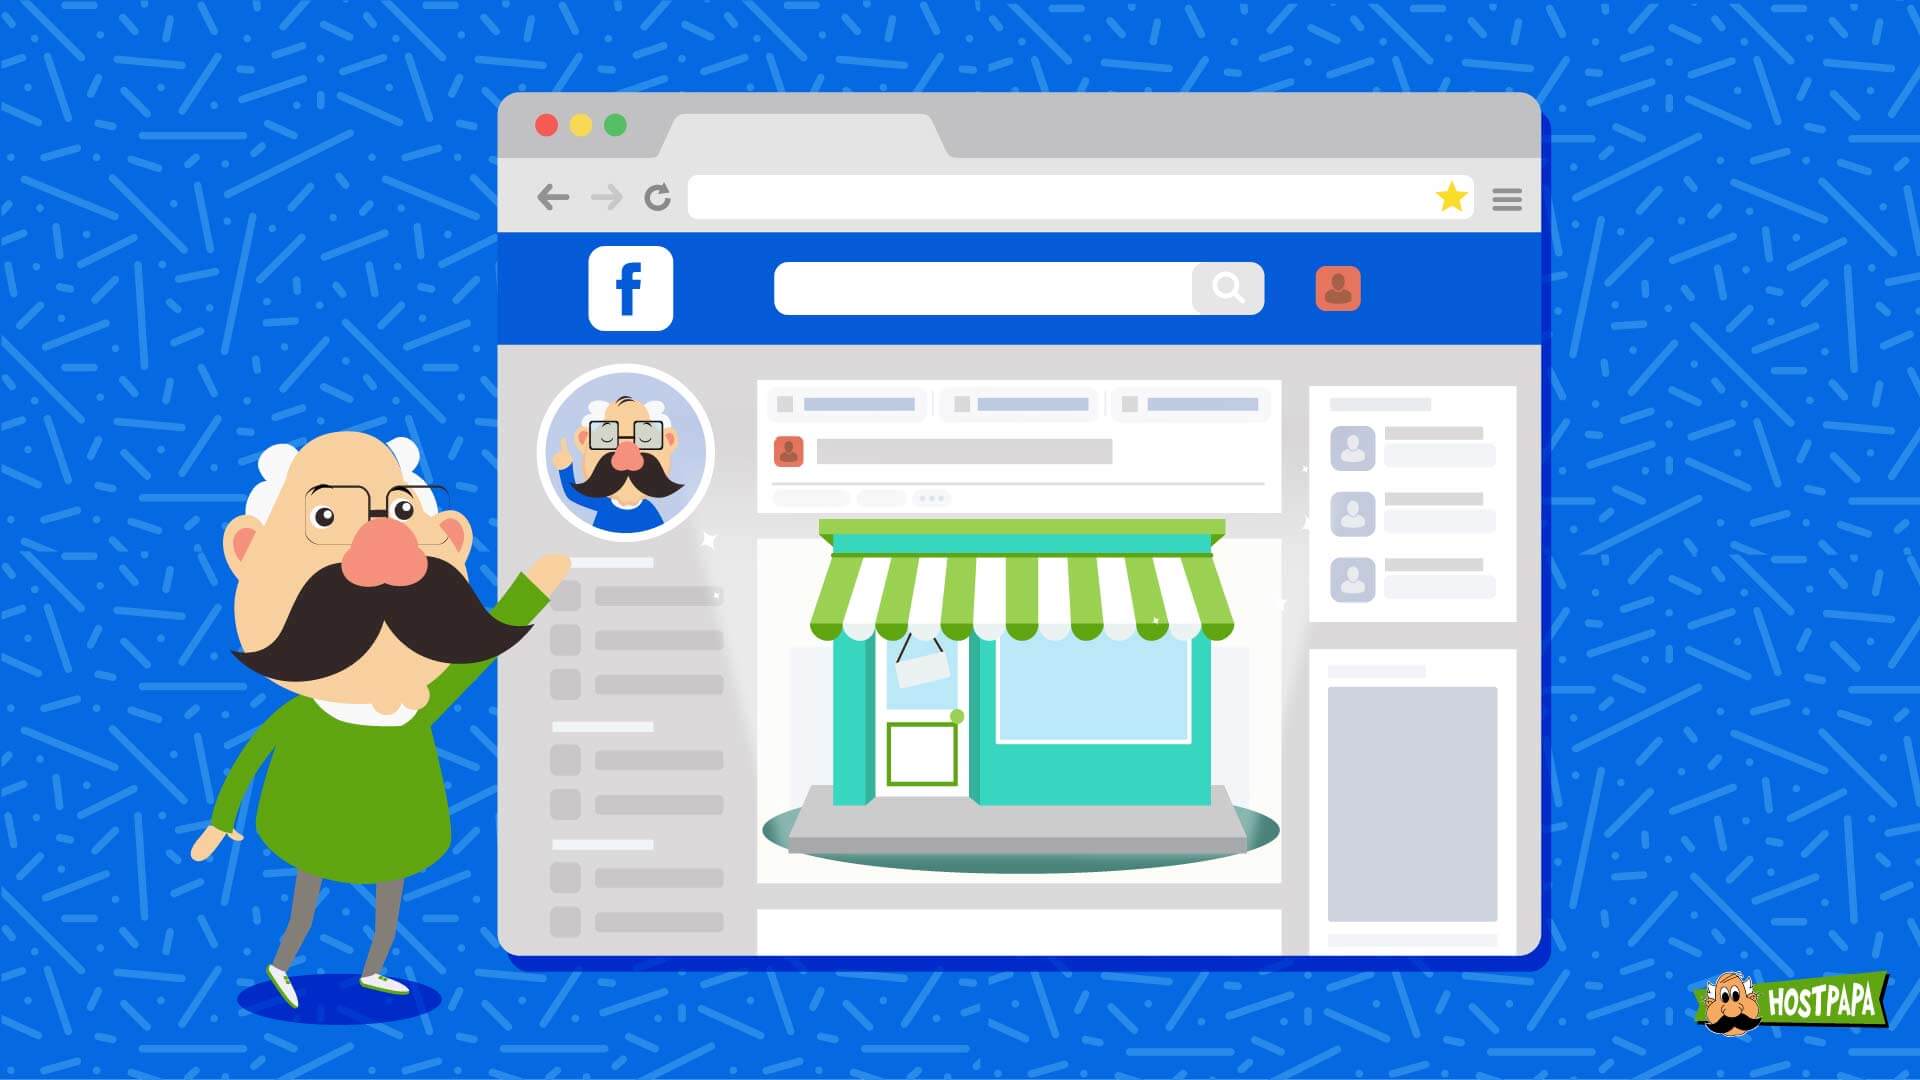 Facebook Marketing Trends for Small Business in 2020